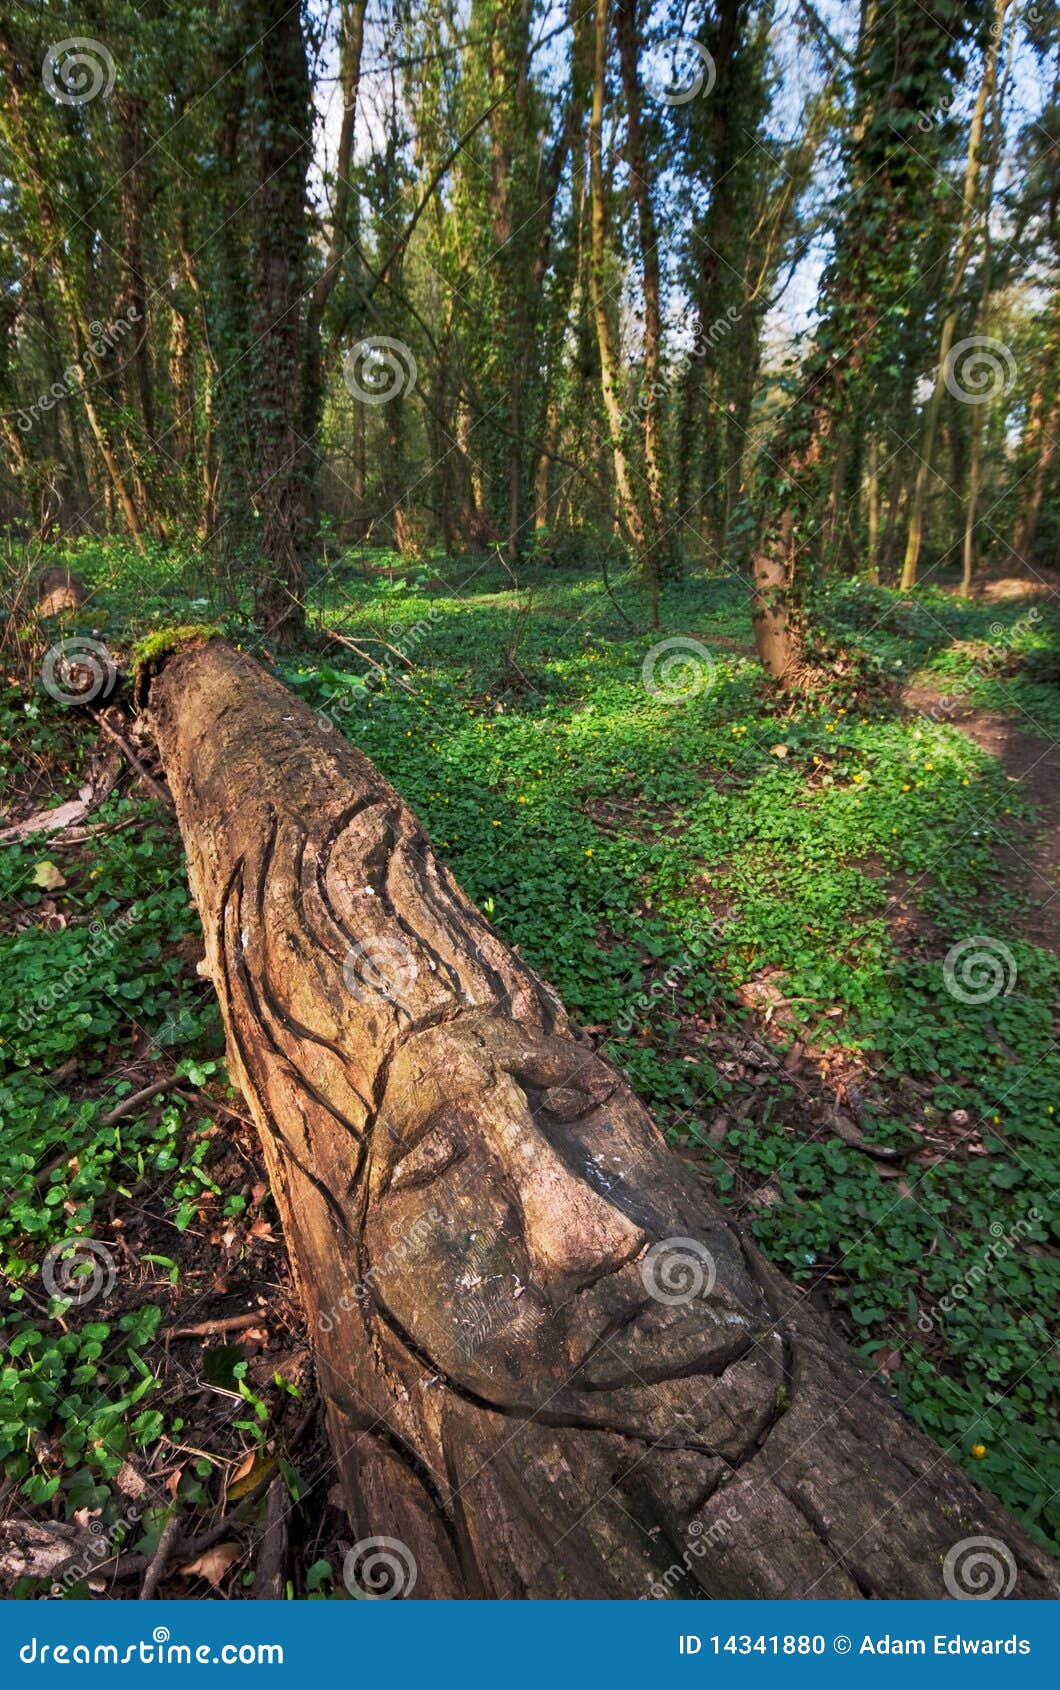 Funny Wood Carving In Spring Woods Stock Photo - Image ...